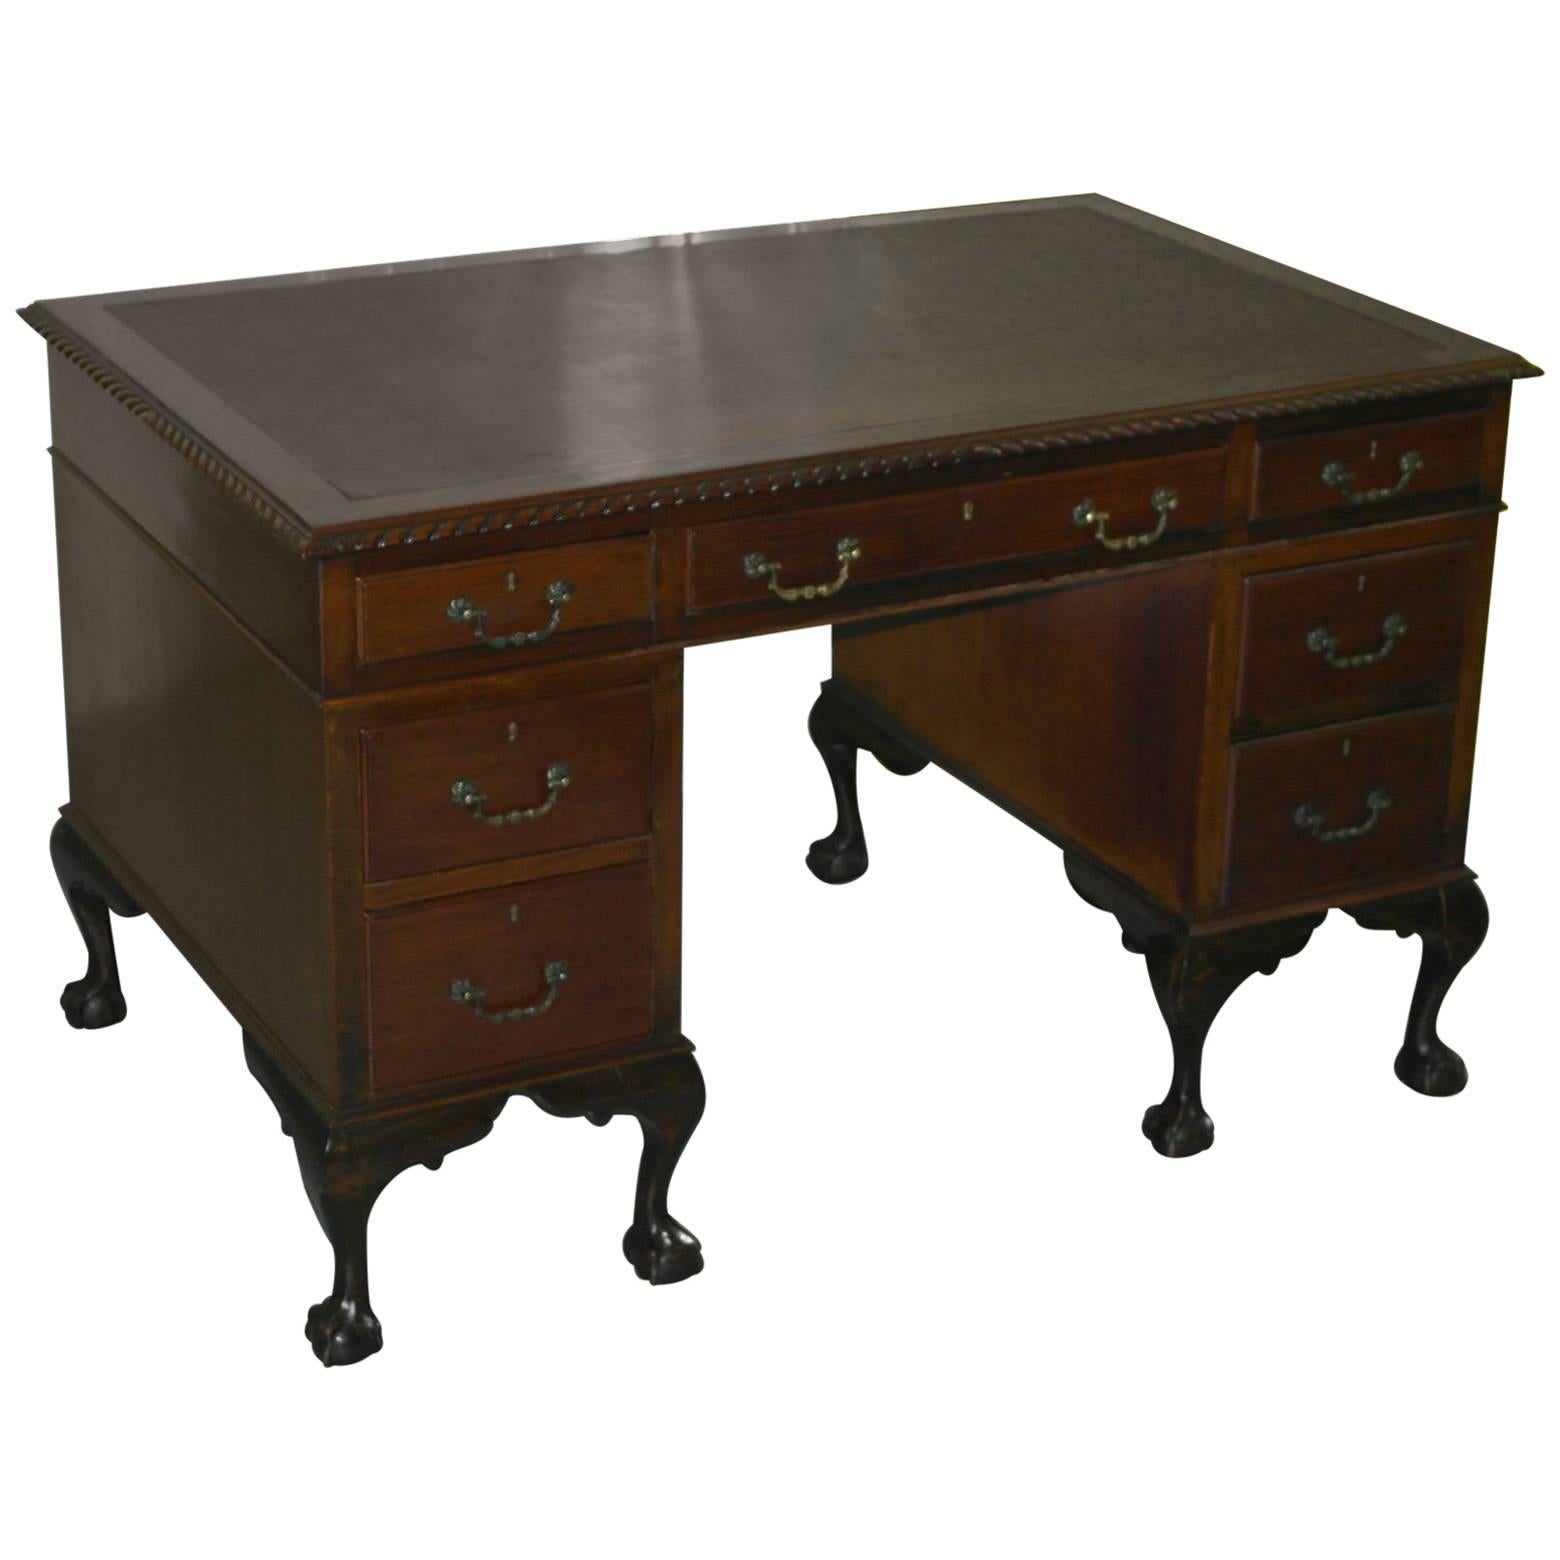 Stunning Antique Queen Anne Partner Desk with Claw and Ball Feet Leather Top